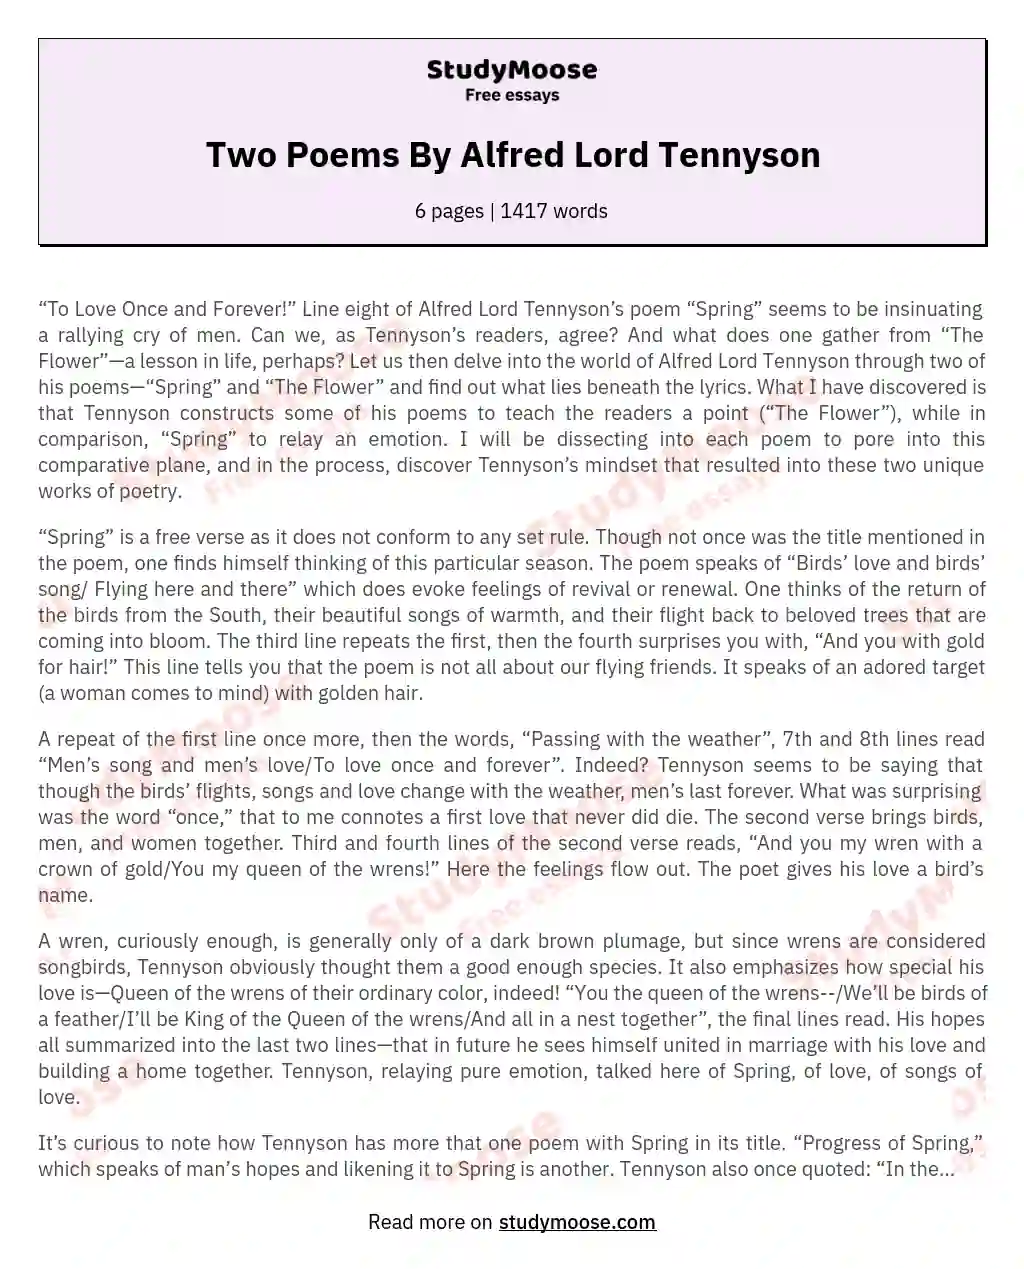 Two Poems By Alfred Lord Tennyson essay